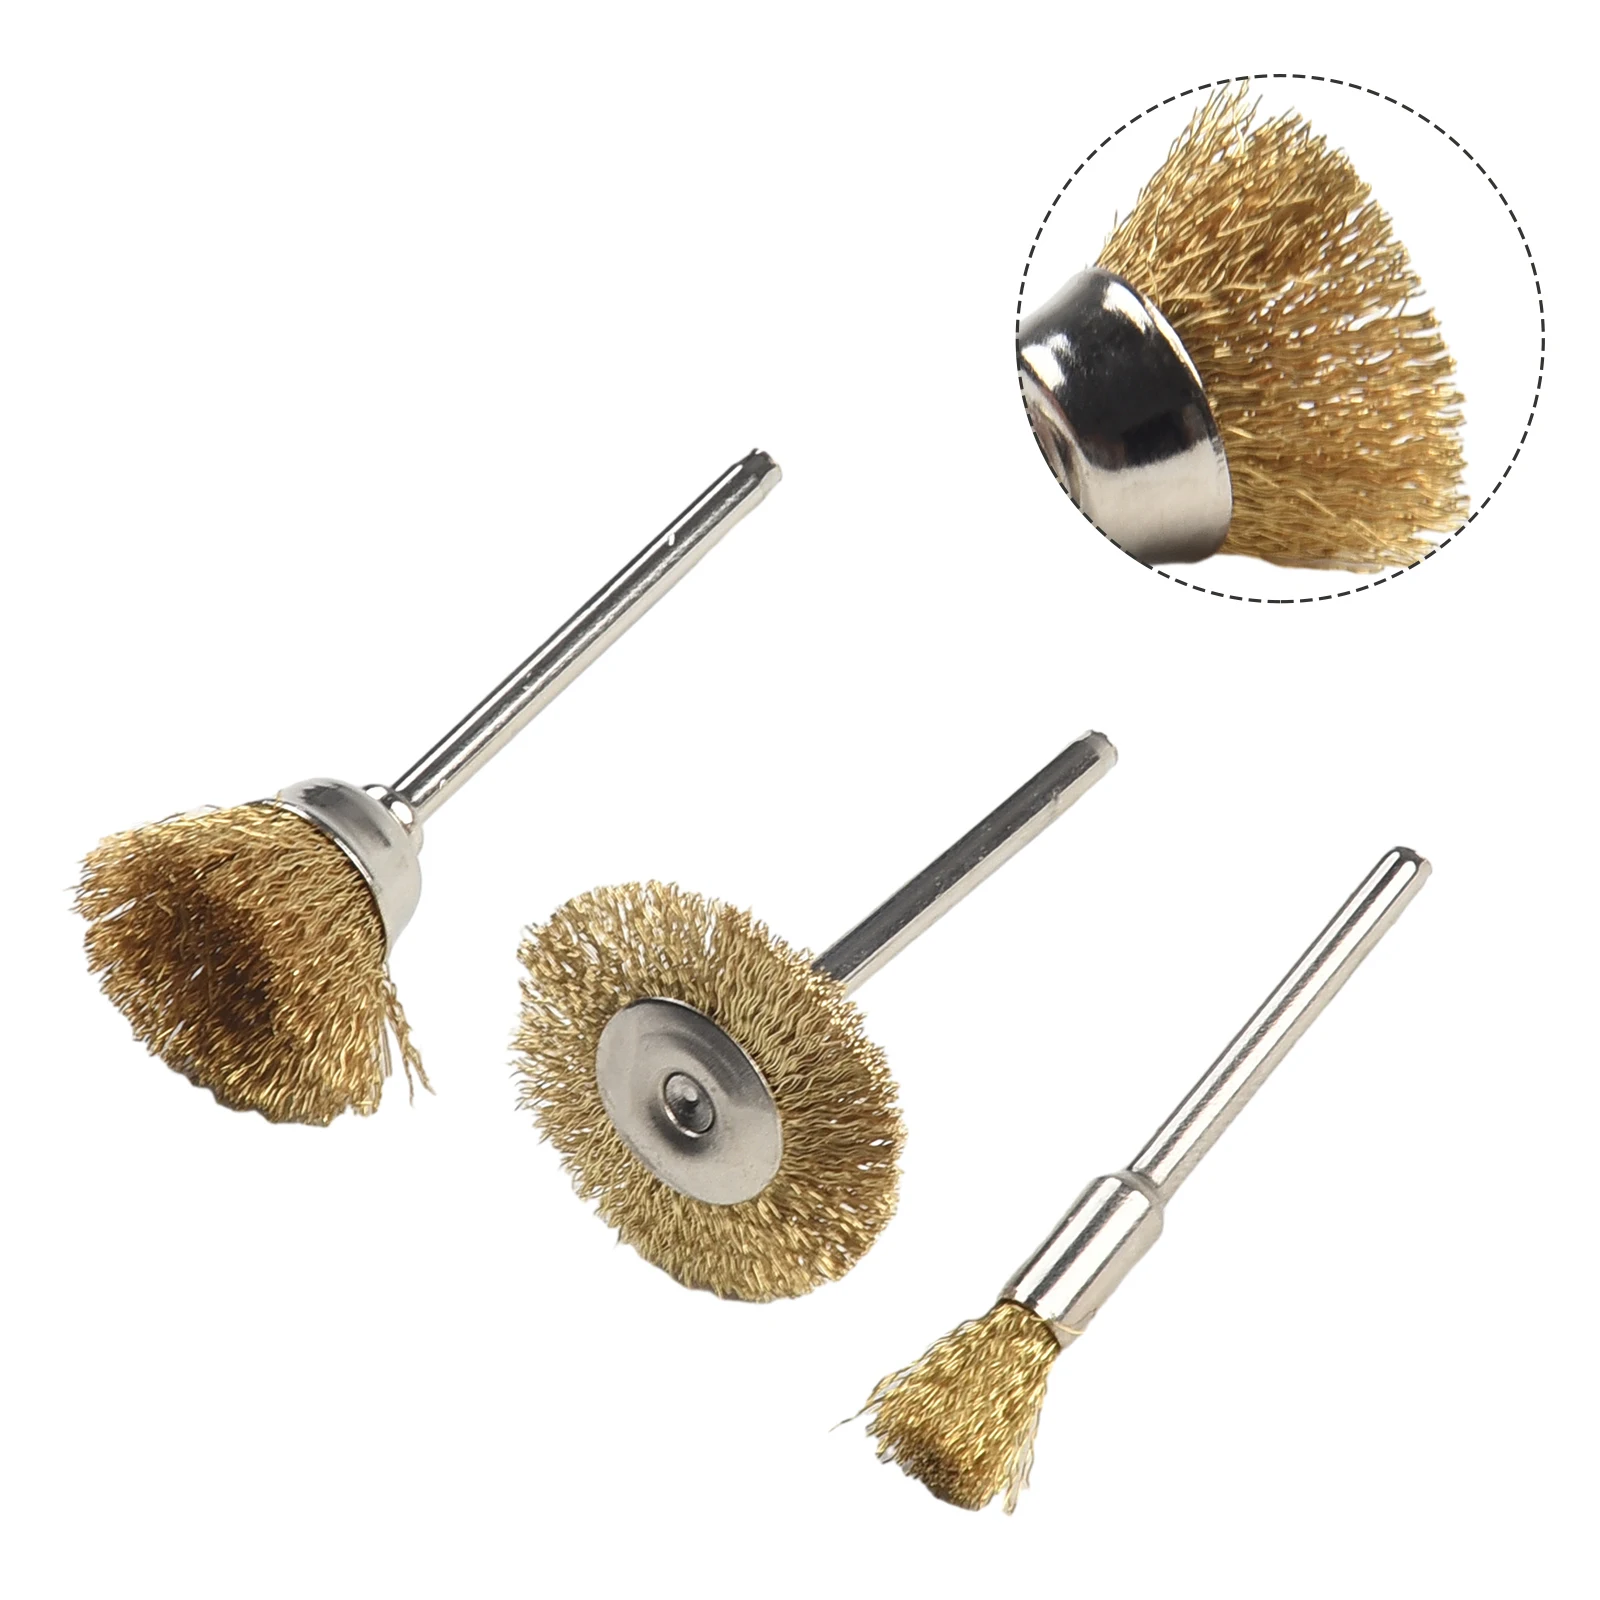 3 PCS Copper Wire Brushes Set For Metal Rust Removing Brush Polishing Tools For Rotary Grinder Power Tool Accessories valiantoin 1 8 air micro grinder 3mm pneumatic pencil die grinder 58000 rpm free speed polishing engraver kit pneumatic tool